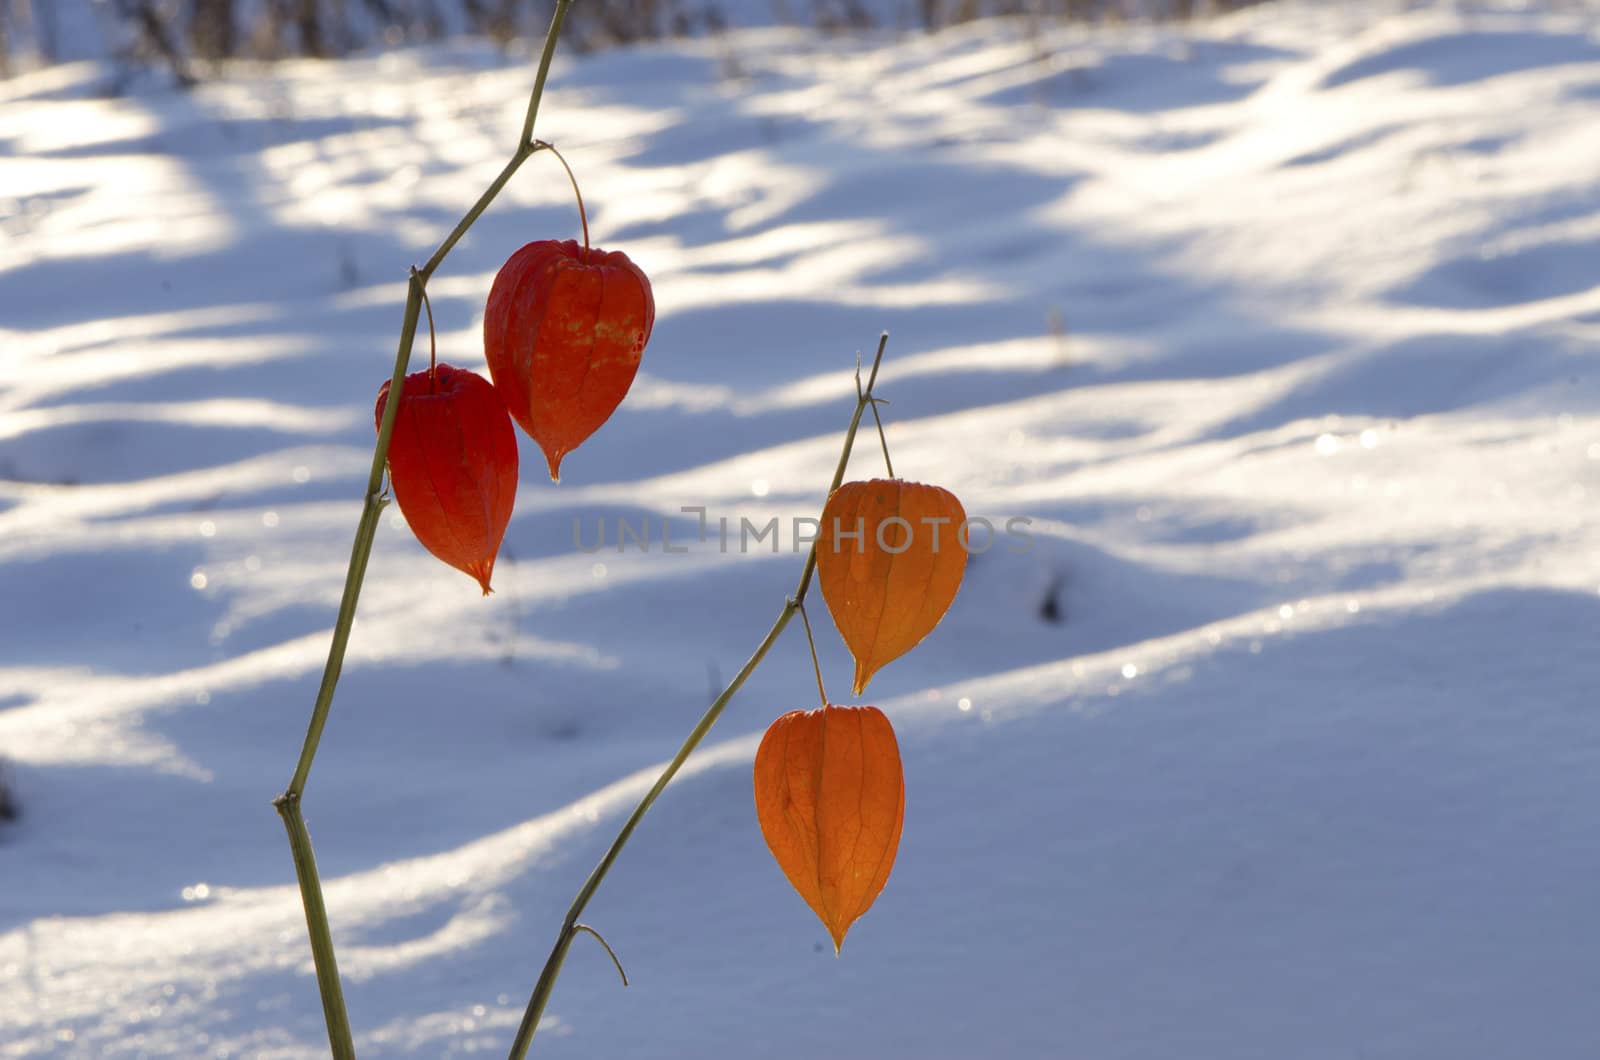 Husk tomatoe Physalis alkekengi plant red fruits on twig surrounded by snowfields survived winter.